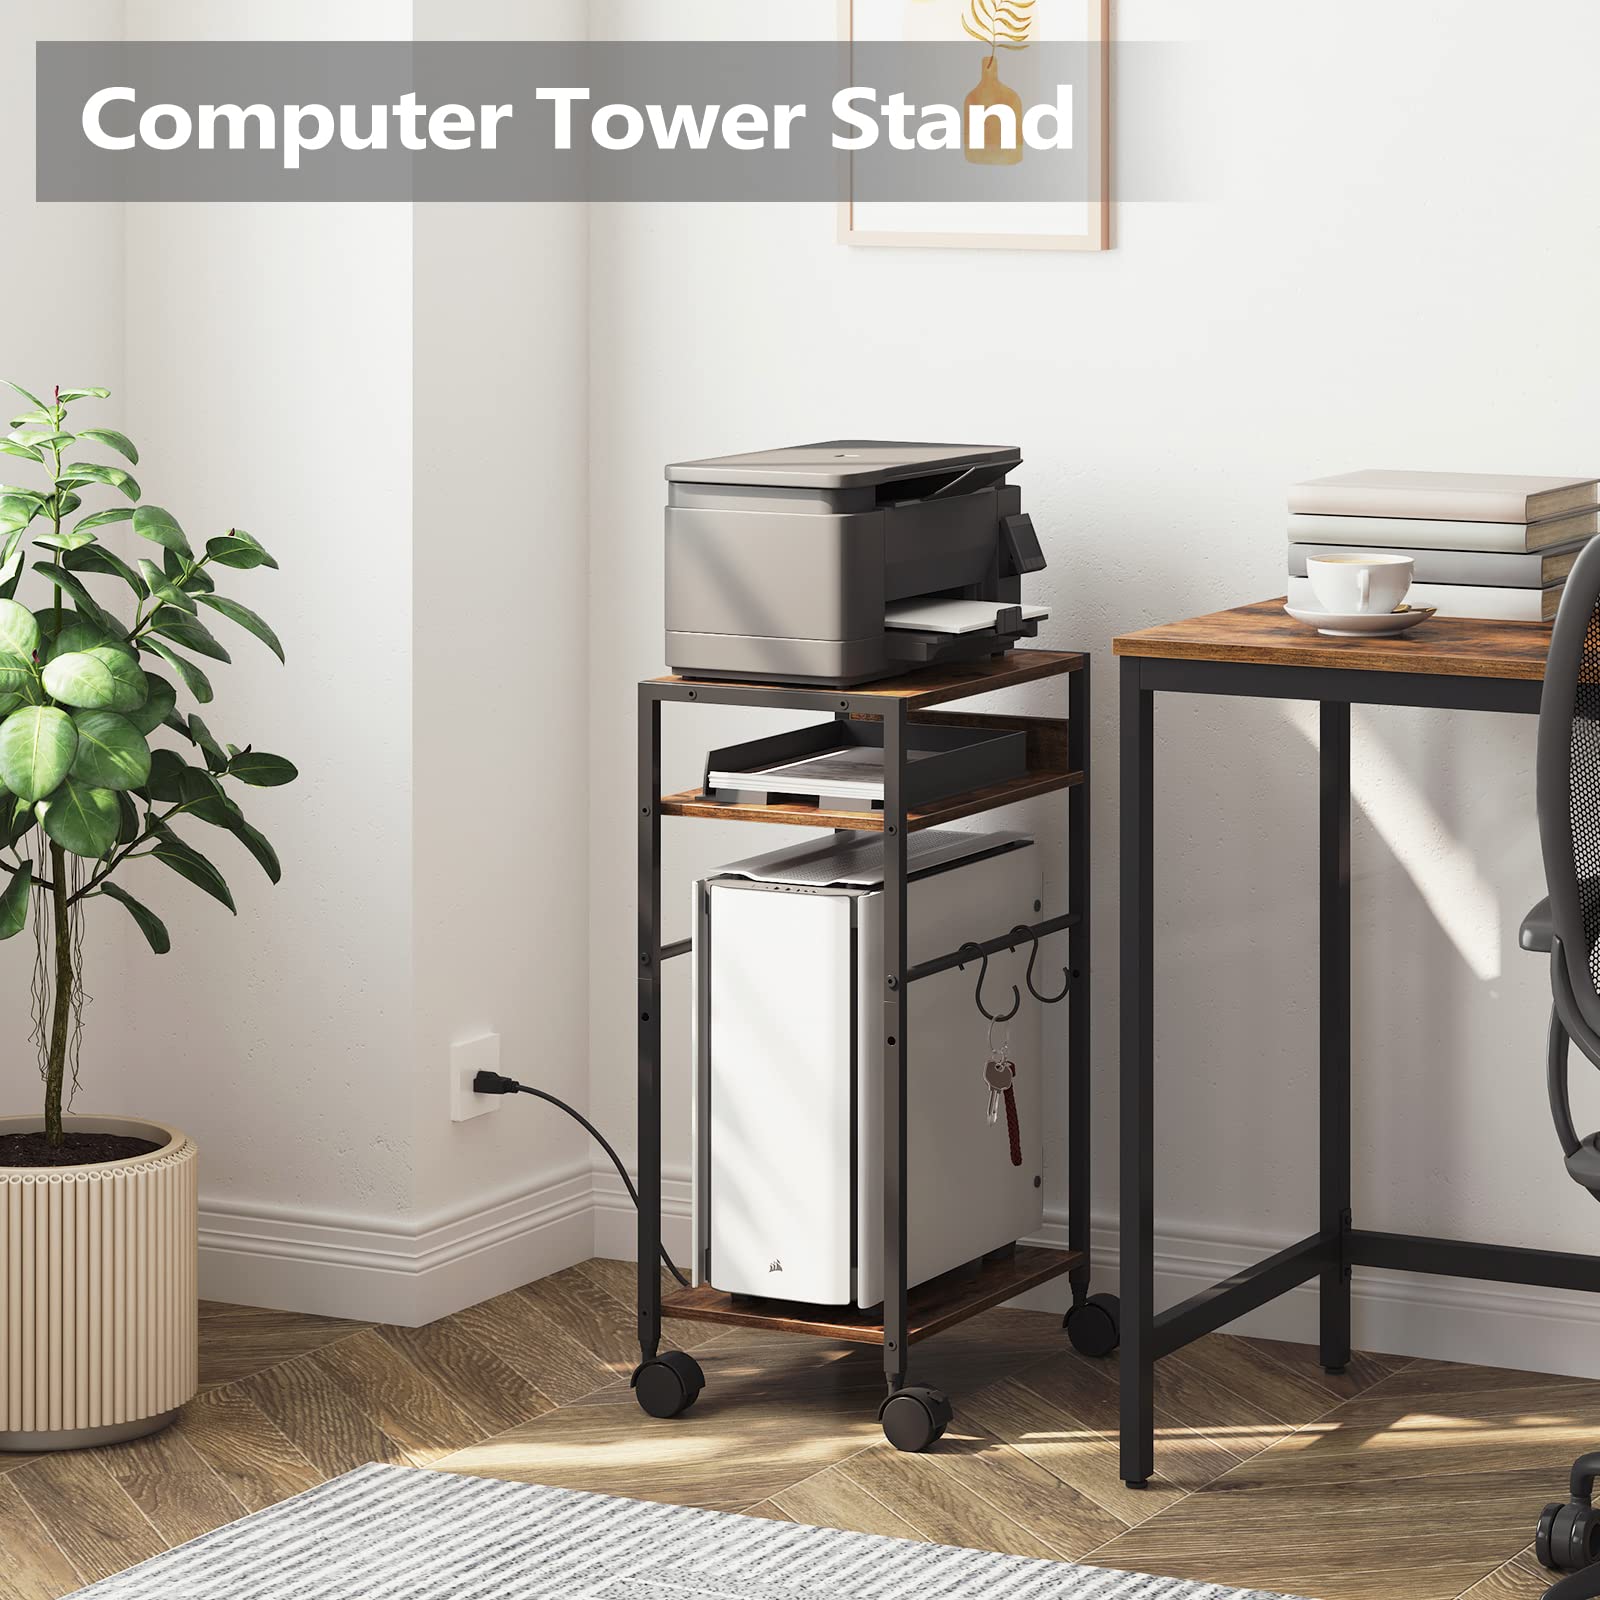 MAHANCRIS Printer Stand with Adjustable Storage Shelf, 3-Tier Computer Tower Stand with 2 Hooks, Rolling Printer Cart for Home Office Small Spaces, CPU Stand with Wheels, Rustic Brown PTHR6001Z